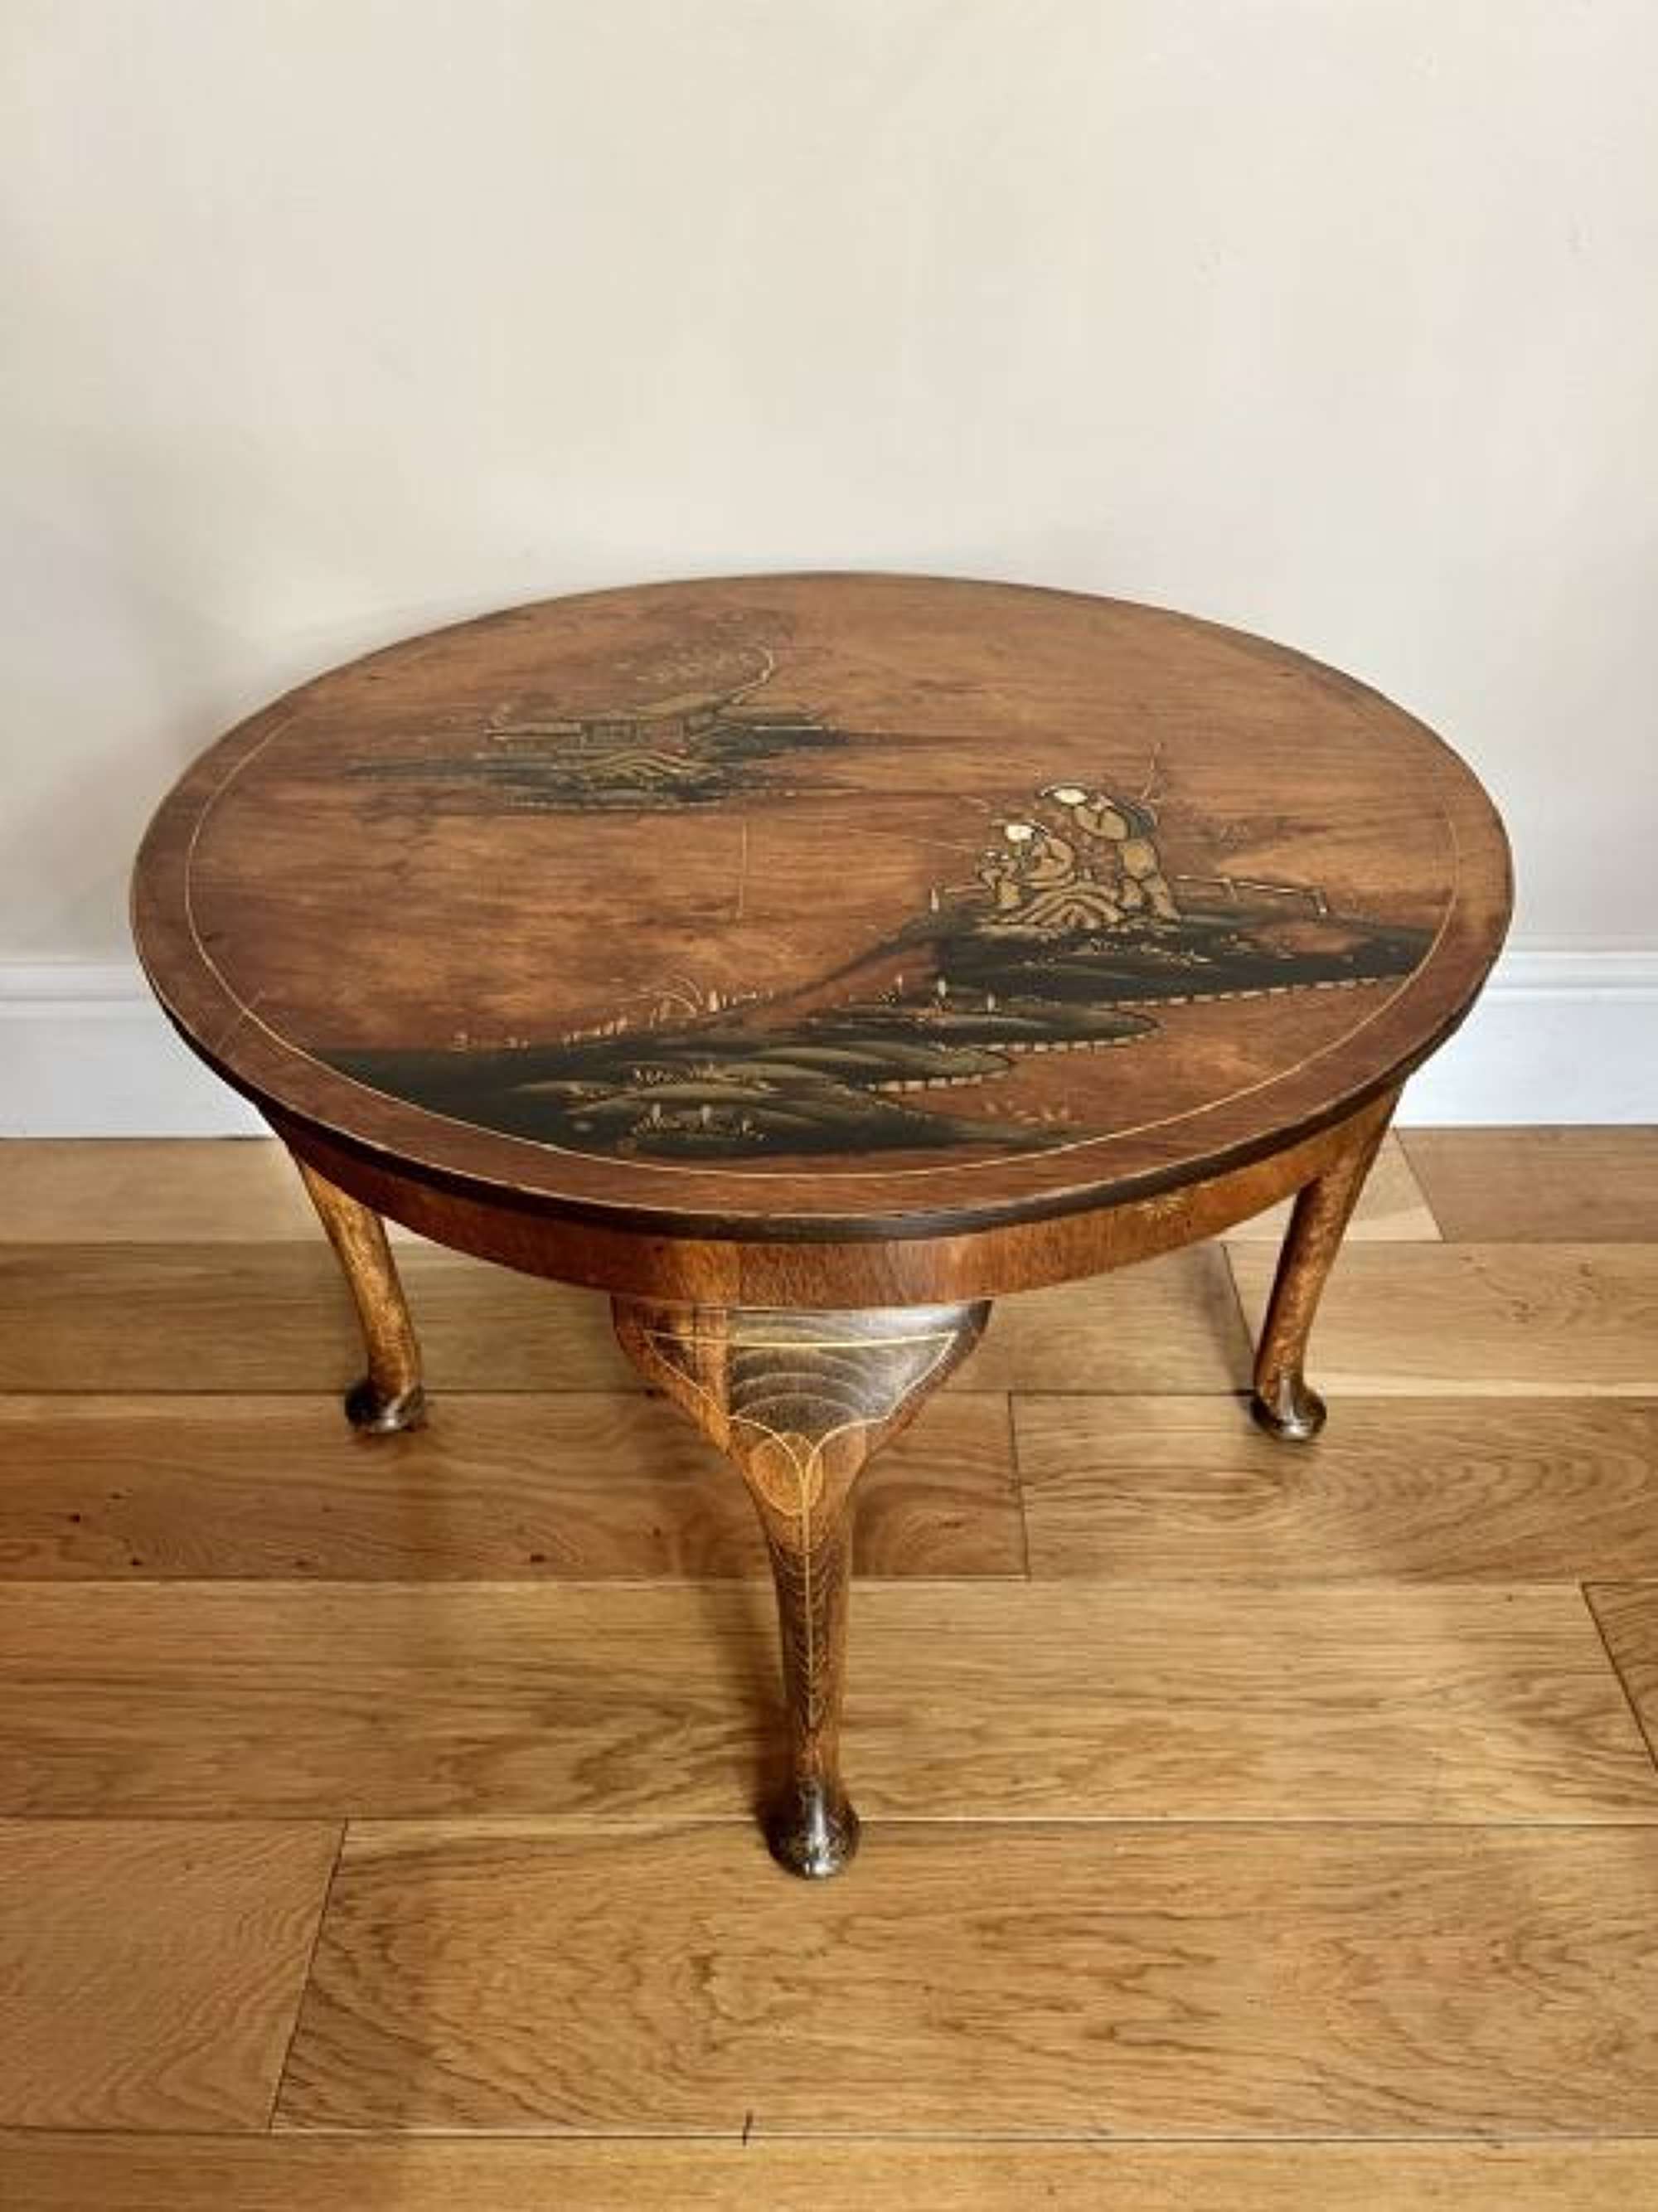 Antique Walnut Chinoiserie Decorated Circular Coffee Table